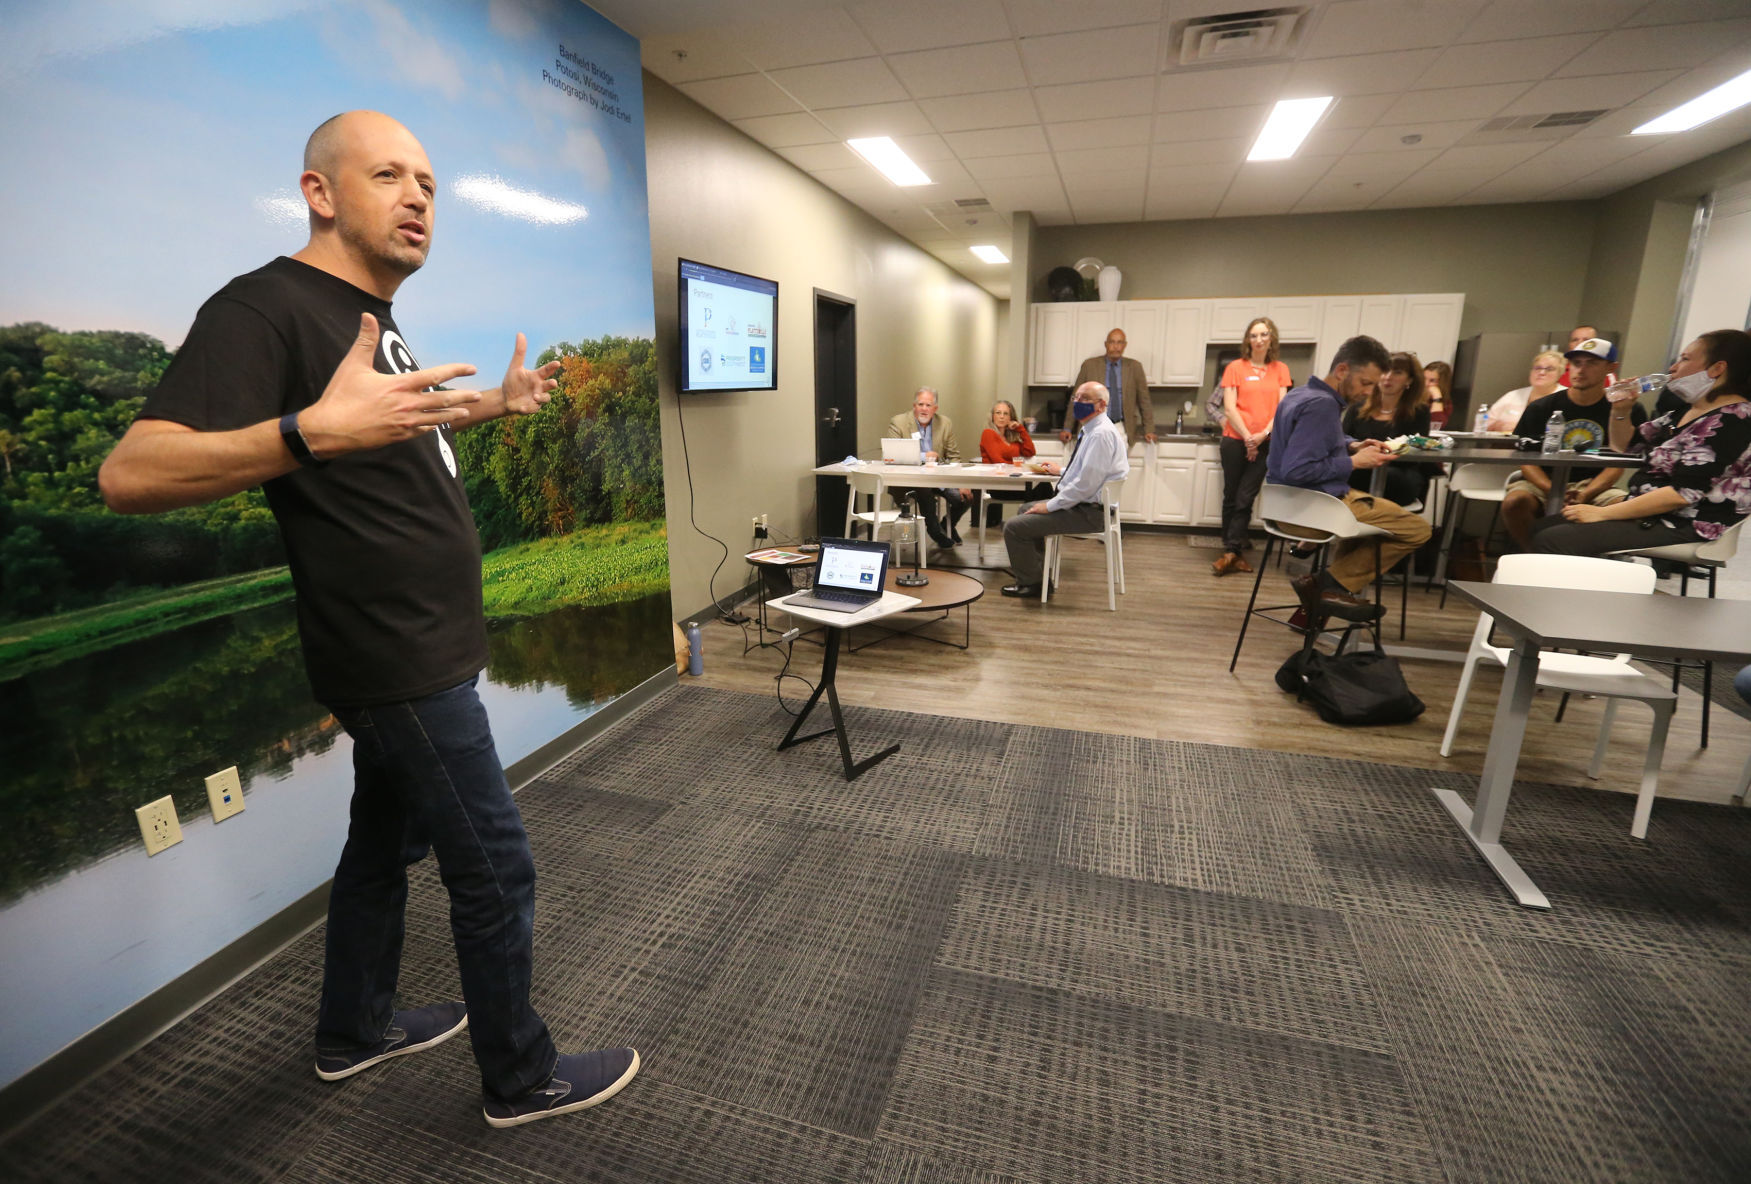 Jeremiah “Maia” Donohue speaks during the grand opening of the Innovation Driving Entrepreneurship Accelerator Hub, known as the IDEA Hub, at Platteville Business Incubator in Platteville, Wis., on Monday.    PHOTO CREDIT: JESSICA REILLY